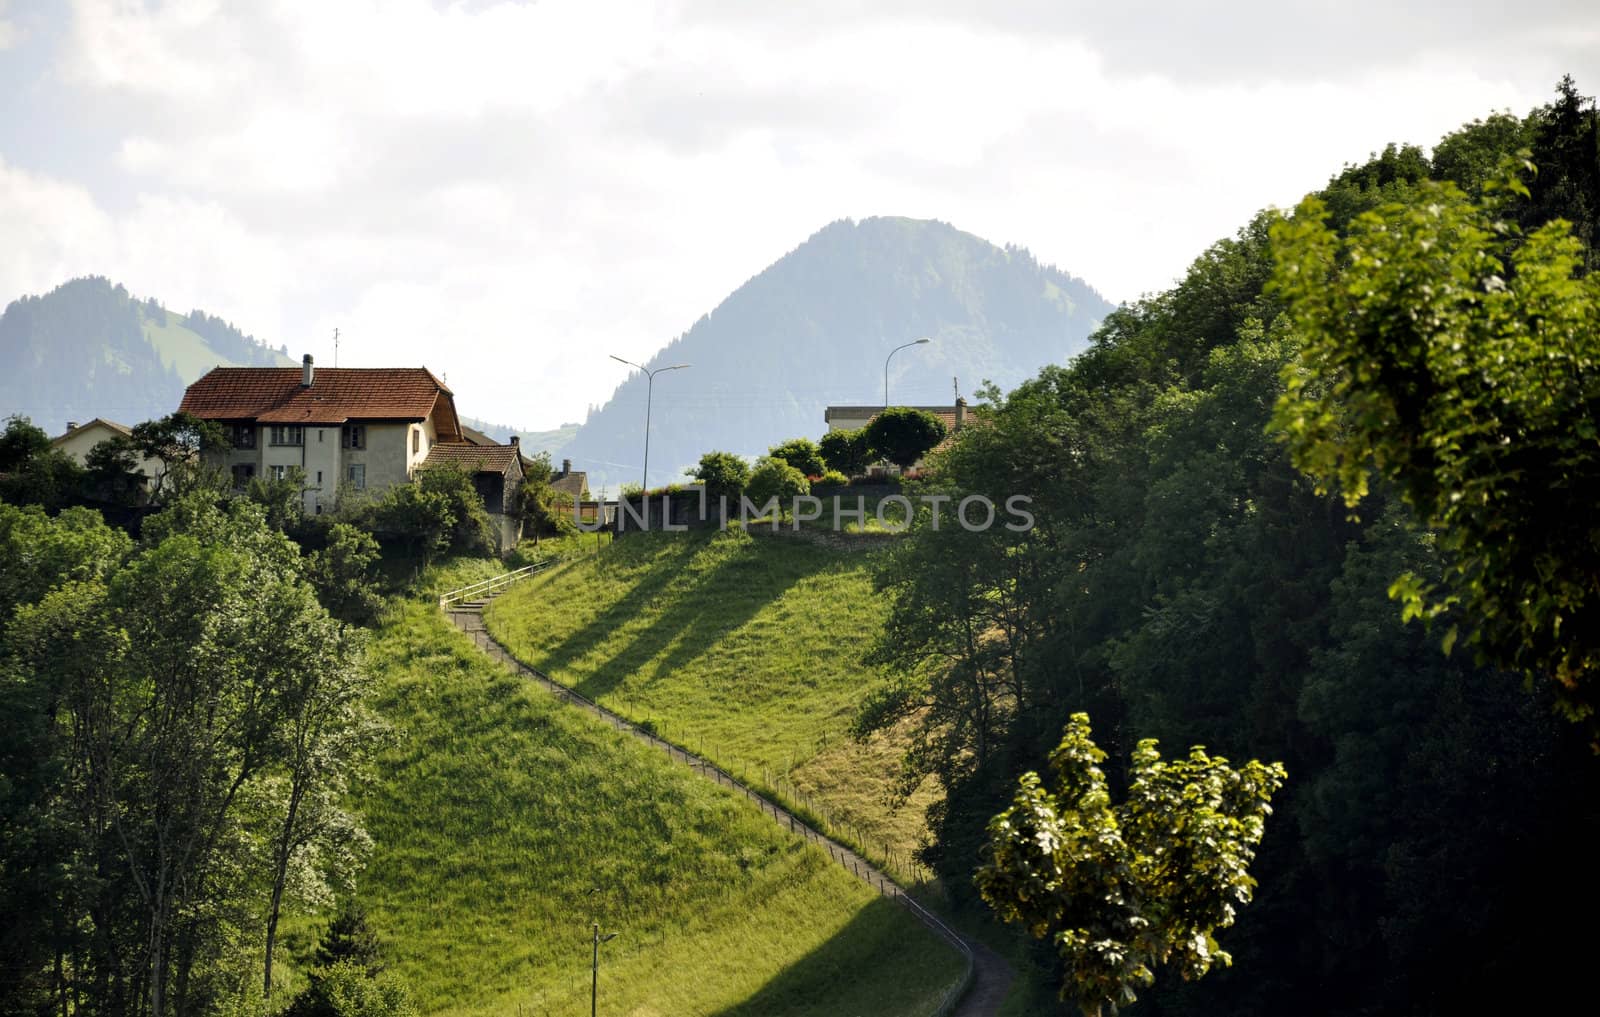 A path leading up to a house on a hill